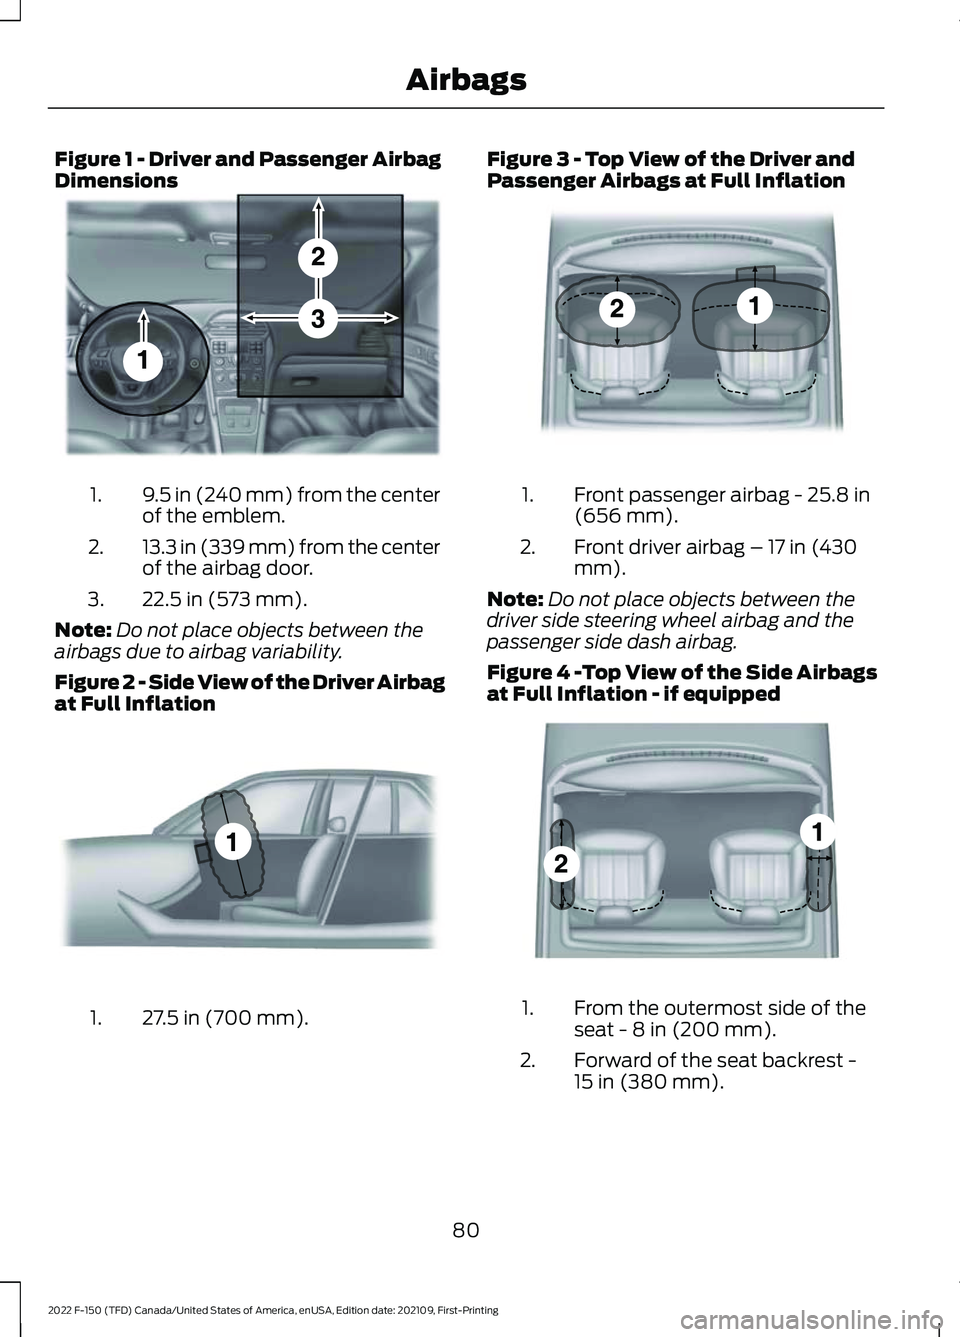 FORD F-150 2022 Manual Online Figure 1 - Driver and Passenger Airbag
Dimensions
9.5 in (240 mm) from the center
of the emblem.
1.
13.3 in (339 mm) from the center
of the airbag door.
2.
22.5 in (573 mm).
3.
Note: Do not place obje